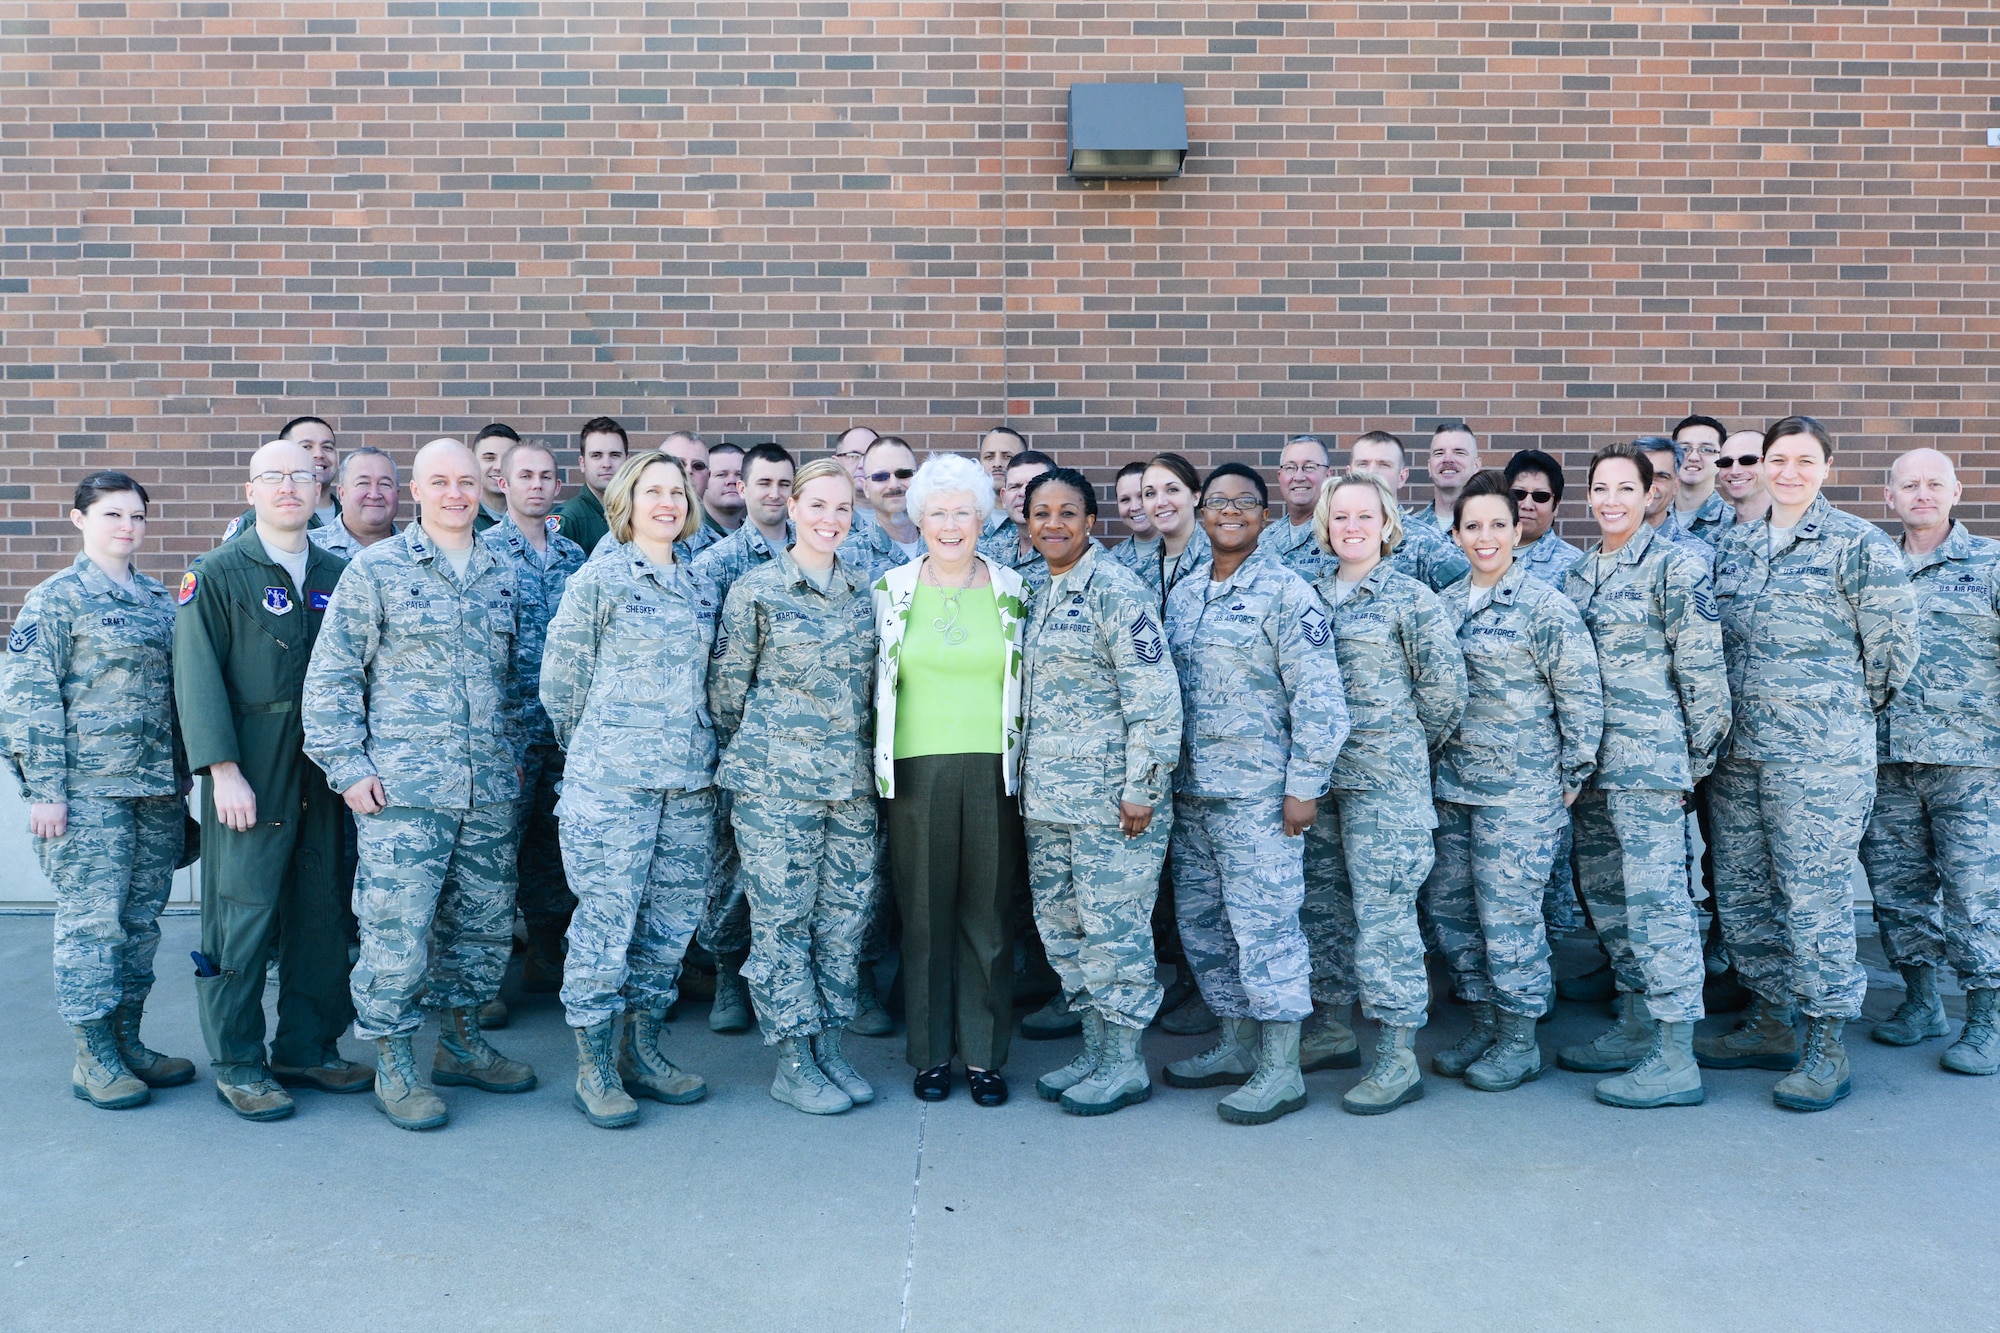 Airmen from the 139th Airlift Wing attend a week long protocol course at Rosecrans Air National Guard Base in St. Joseph, Mo., on March 10, 2016.  The Course was taught by Maggie Bonner, a protocol special event management and international relations specialist for the U.S. Air Force Services Agency, who has been teaching protocol for 59 years. (U.S. Air National Guard photo by Senior Airman Bruce Jenkins/Released)